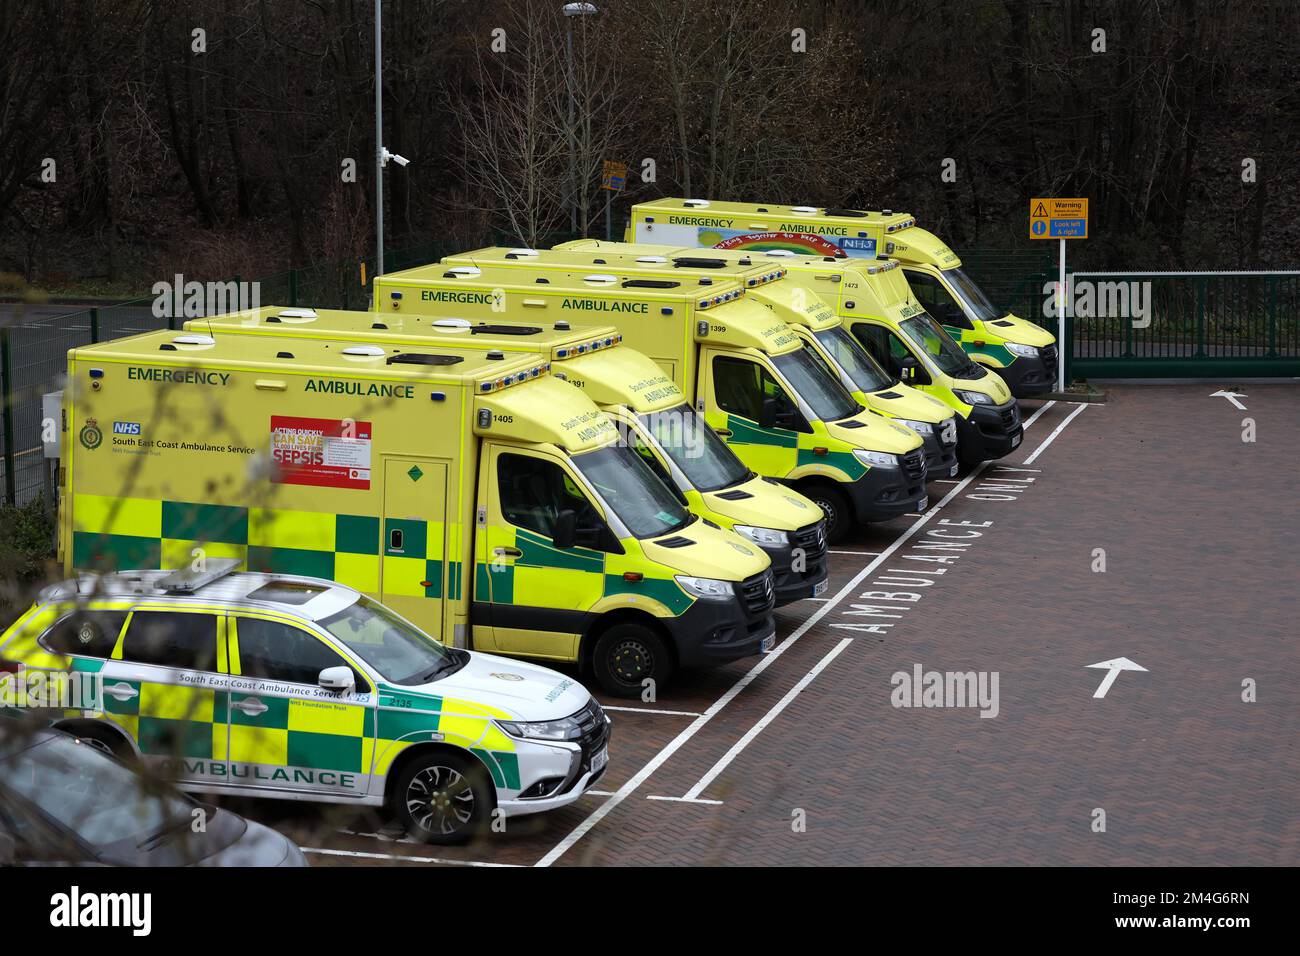 Brighton, UK. 21st Dec, 2022. A row of stationary Ambulances inside Chamberlain House Ambulance Centre in Brighton during the Industrial action by Ambulance staff today. Credit: James Boardman/Alamy Live News Stock Photo